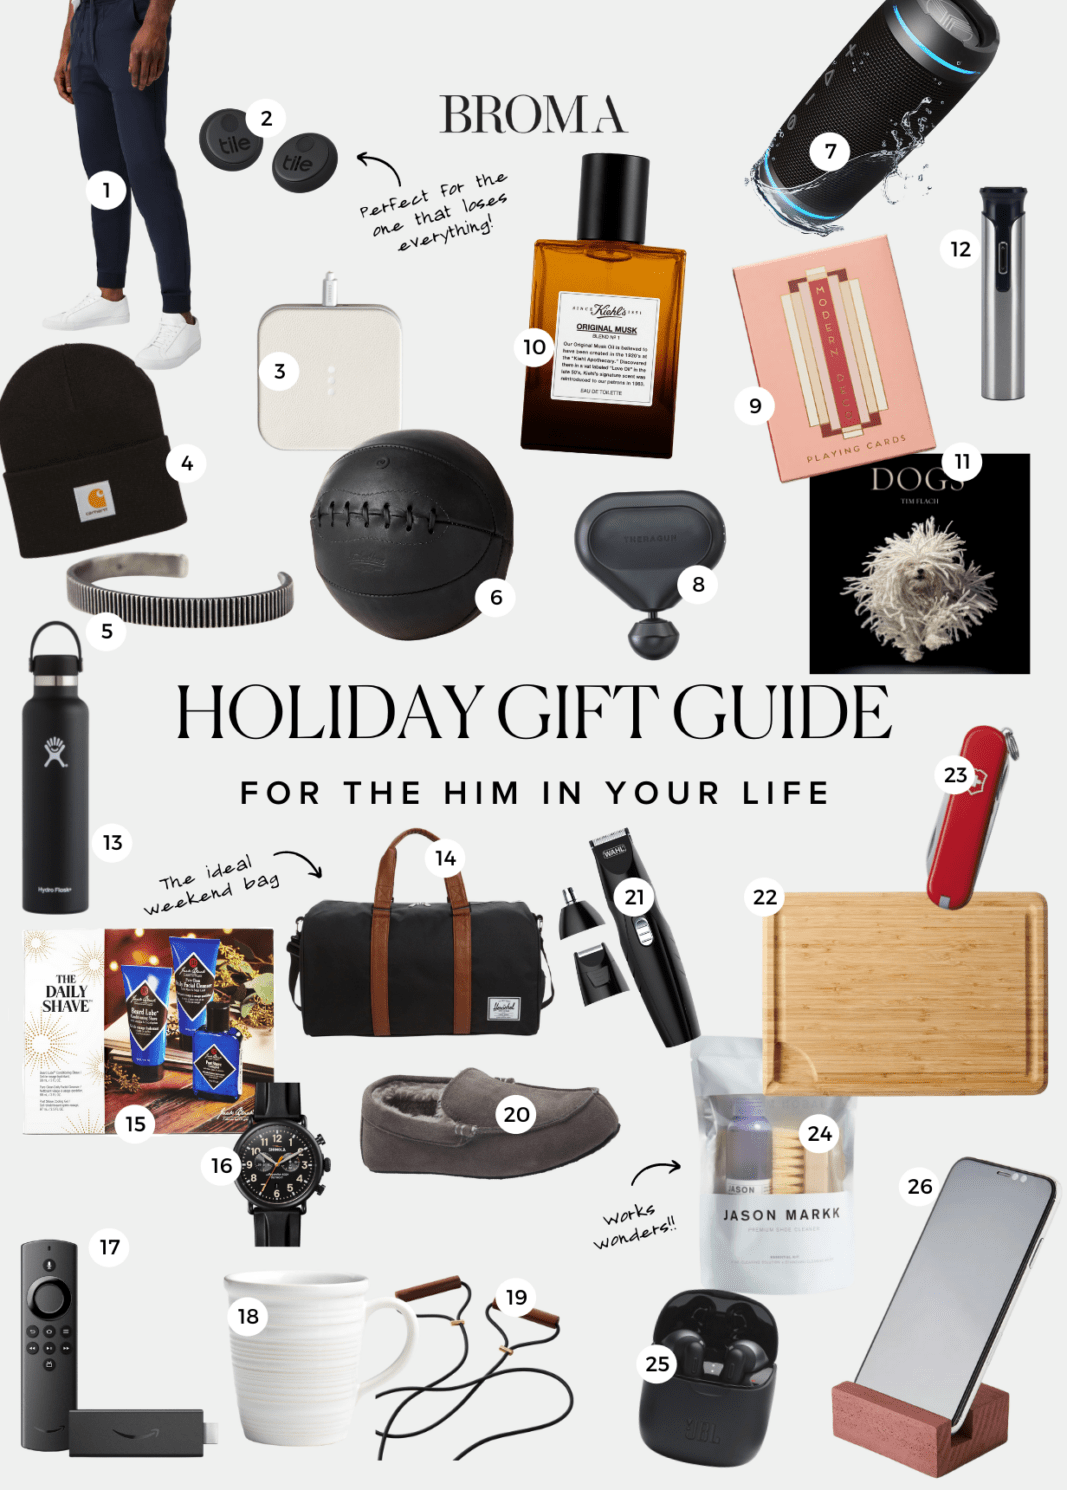 2020 Home Cook's Holiday Gift Guide: 10 Splurge-Worthy Gifts the